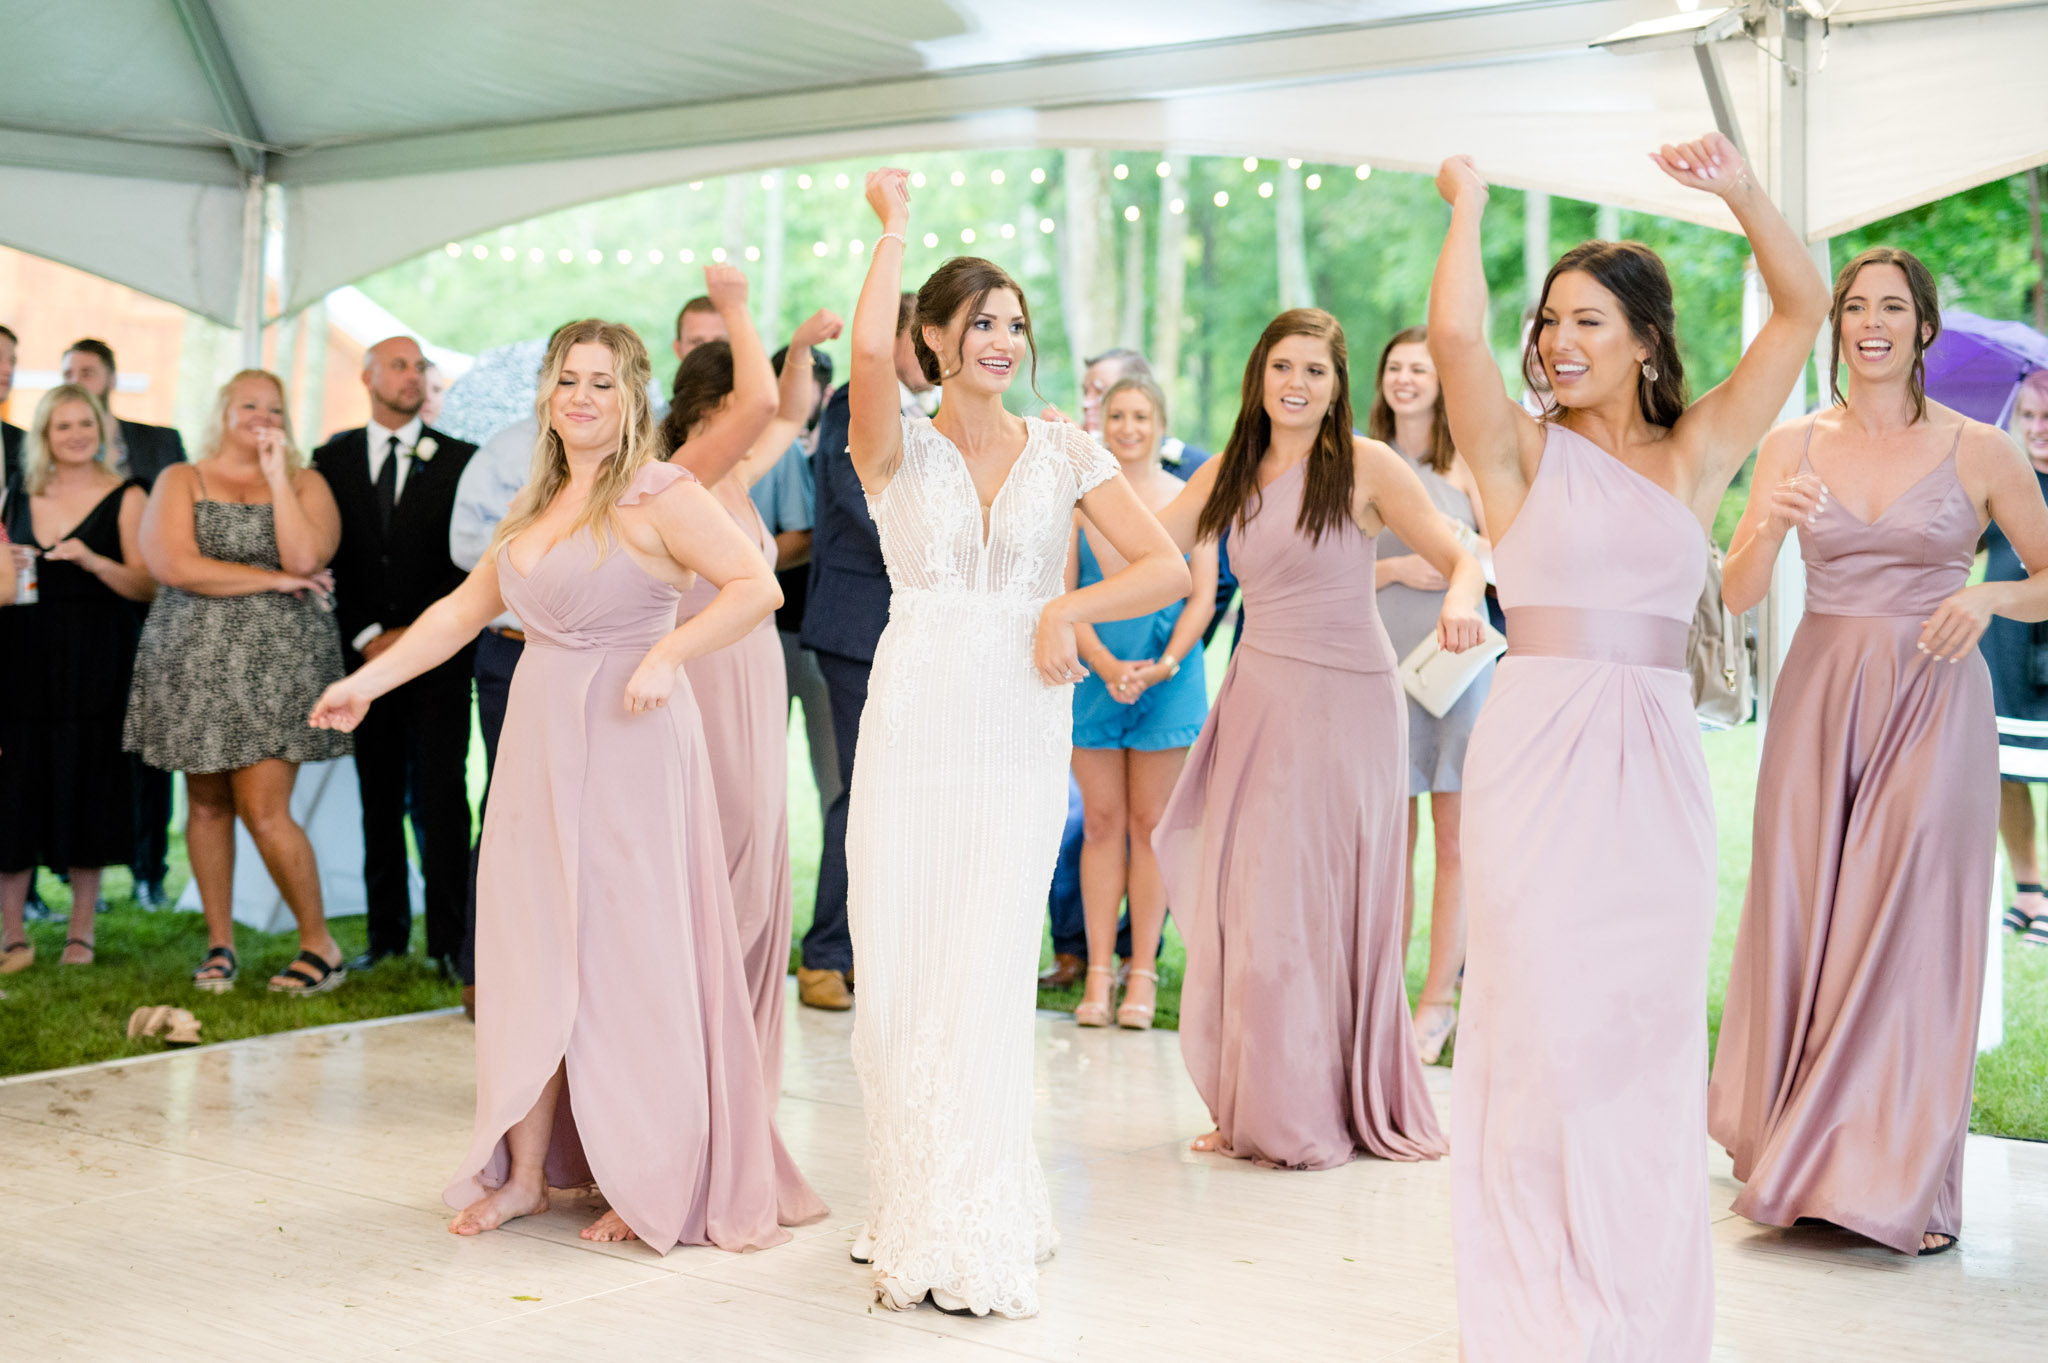 Bride and bridesmaid's dance together.